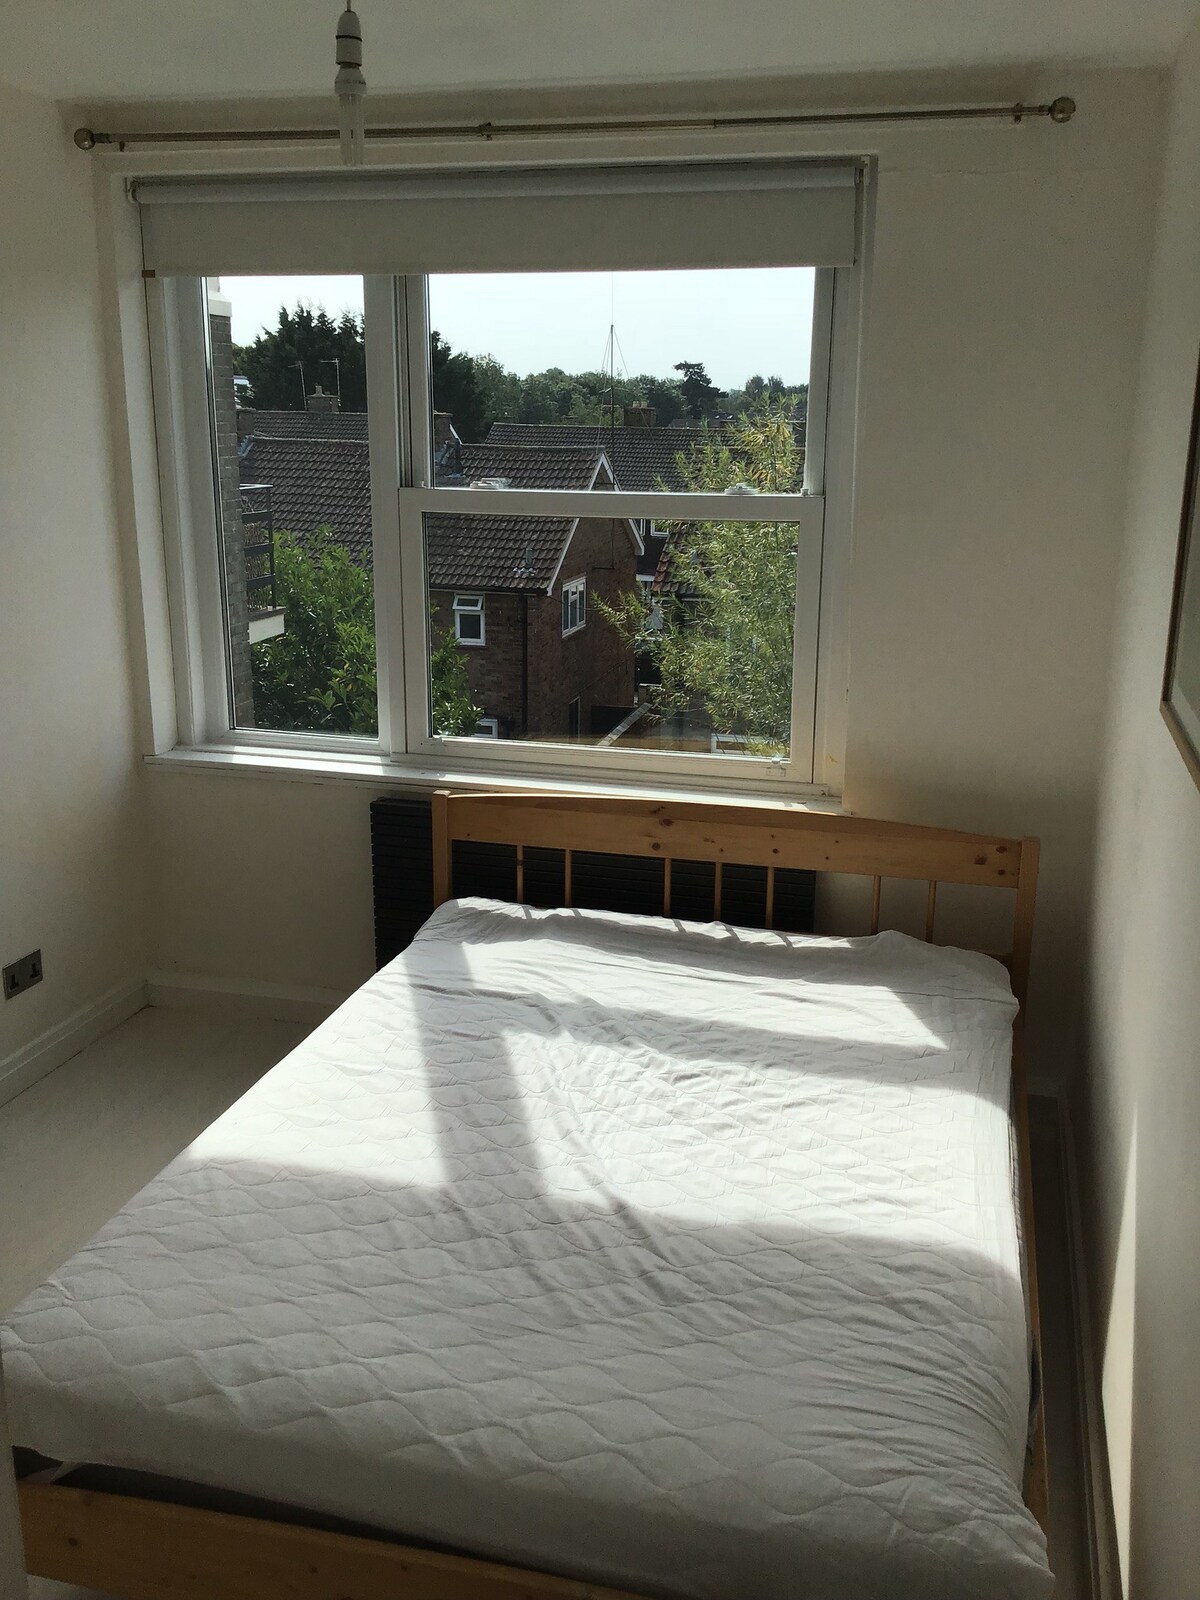 Two bedroom flat, North Oxford